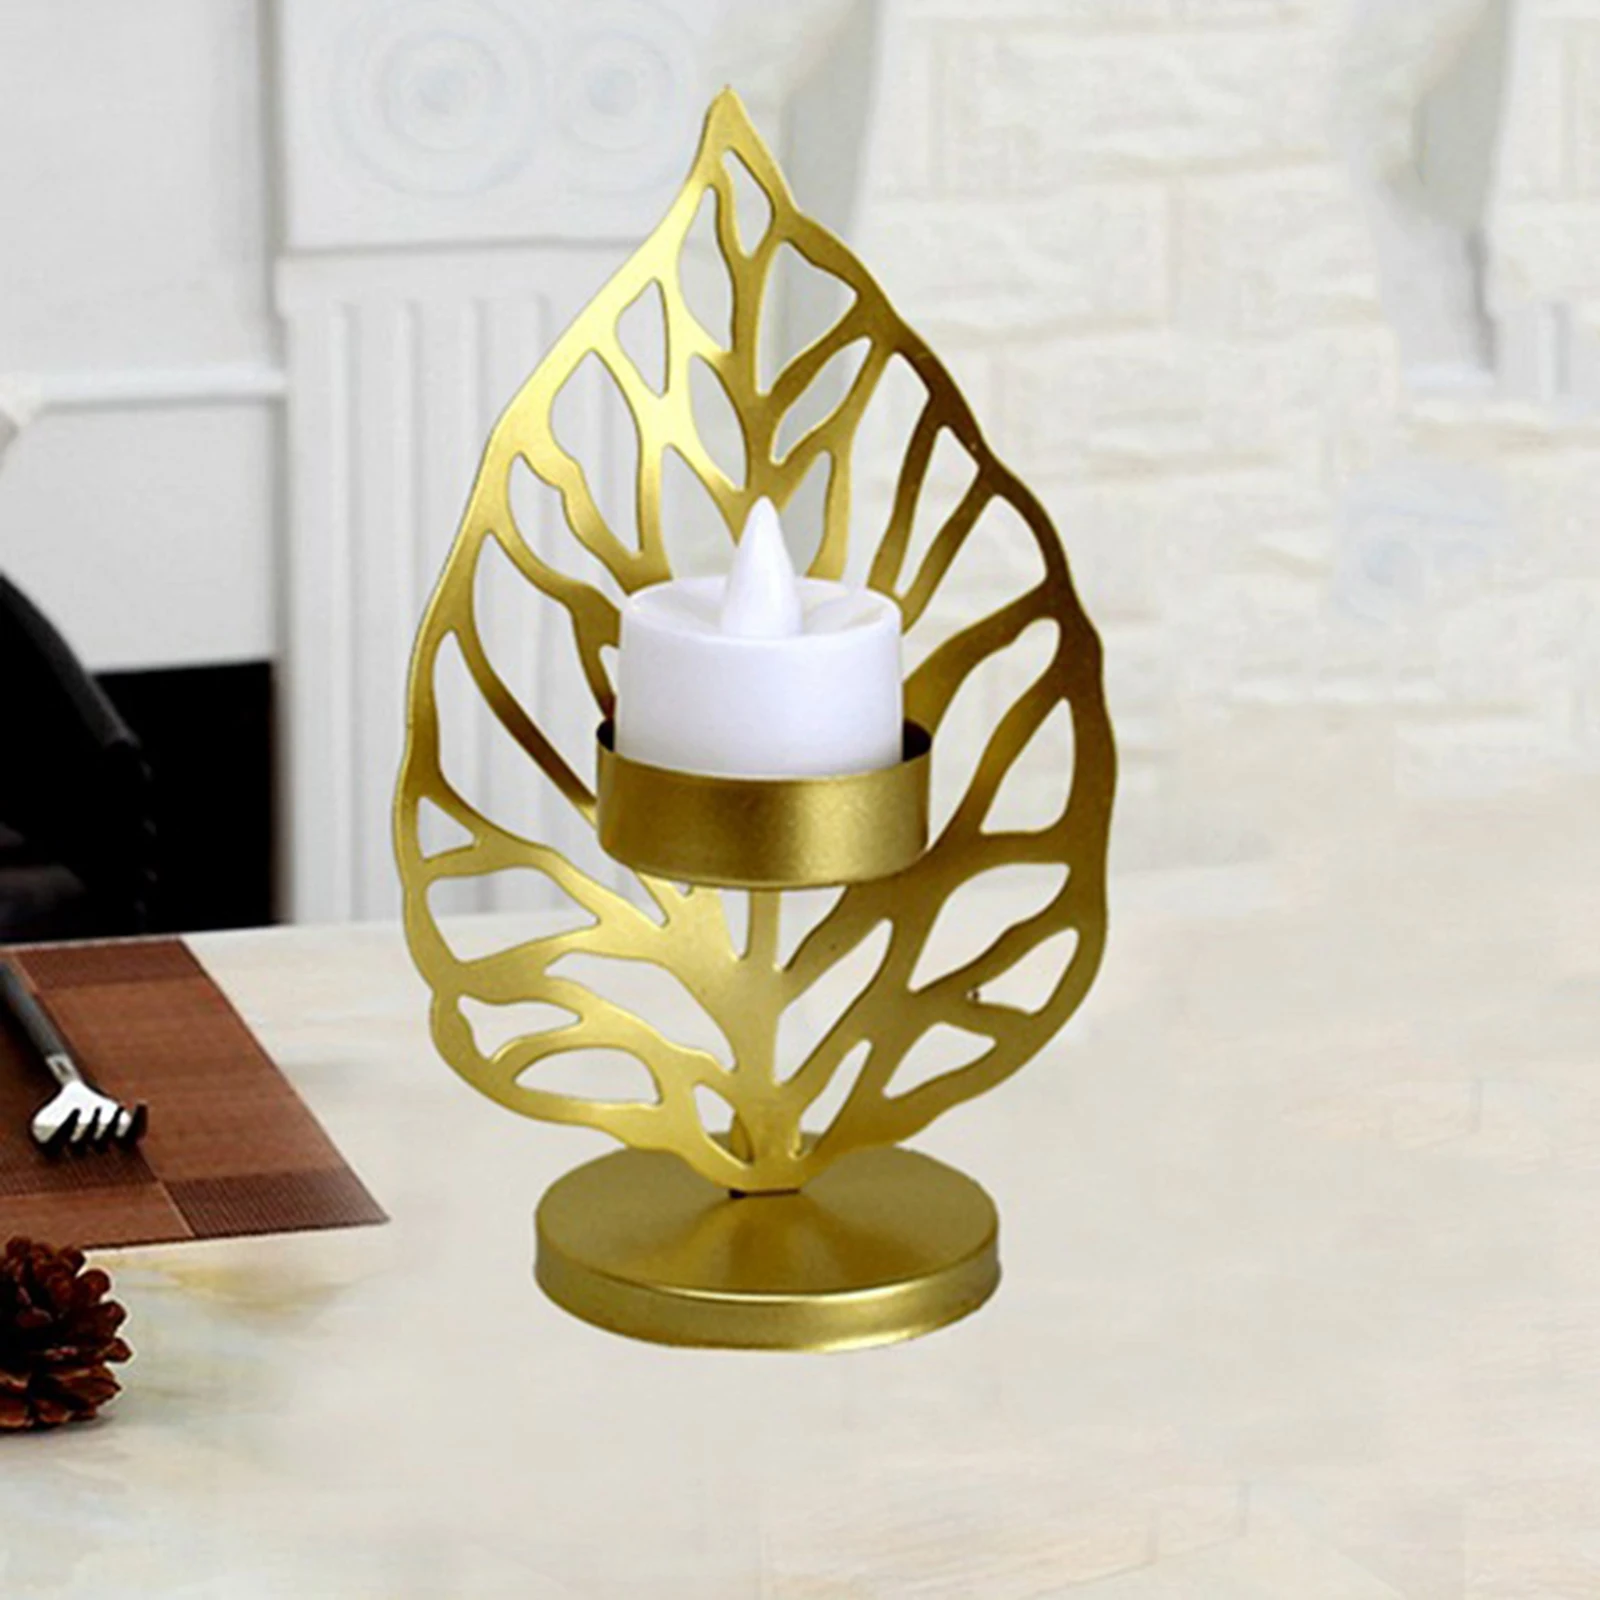 Nordic Home Decoration Leaf Candlestick Wrought Iron Candle Holder Leaf Model Crafts Living Room Decoration Holiday Decor Gifts